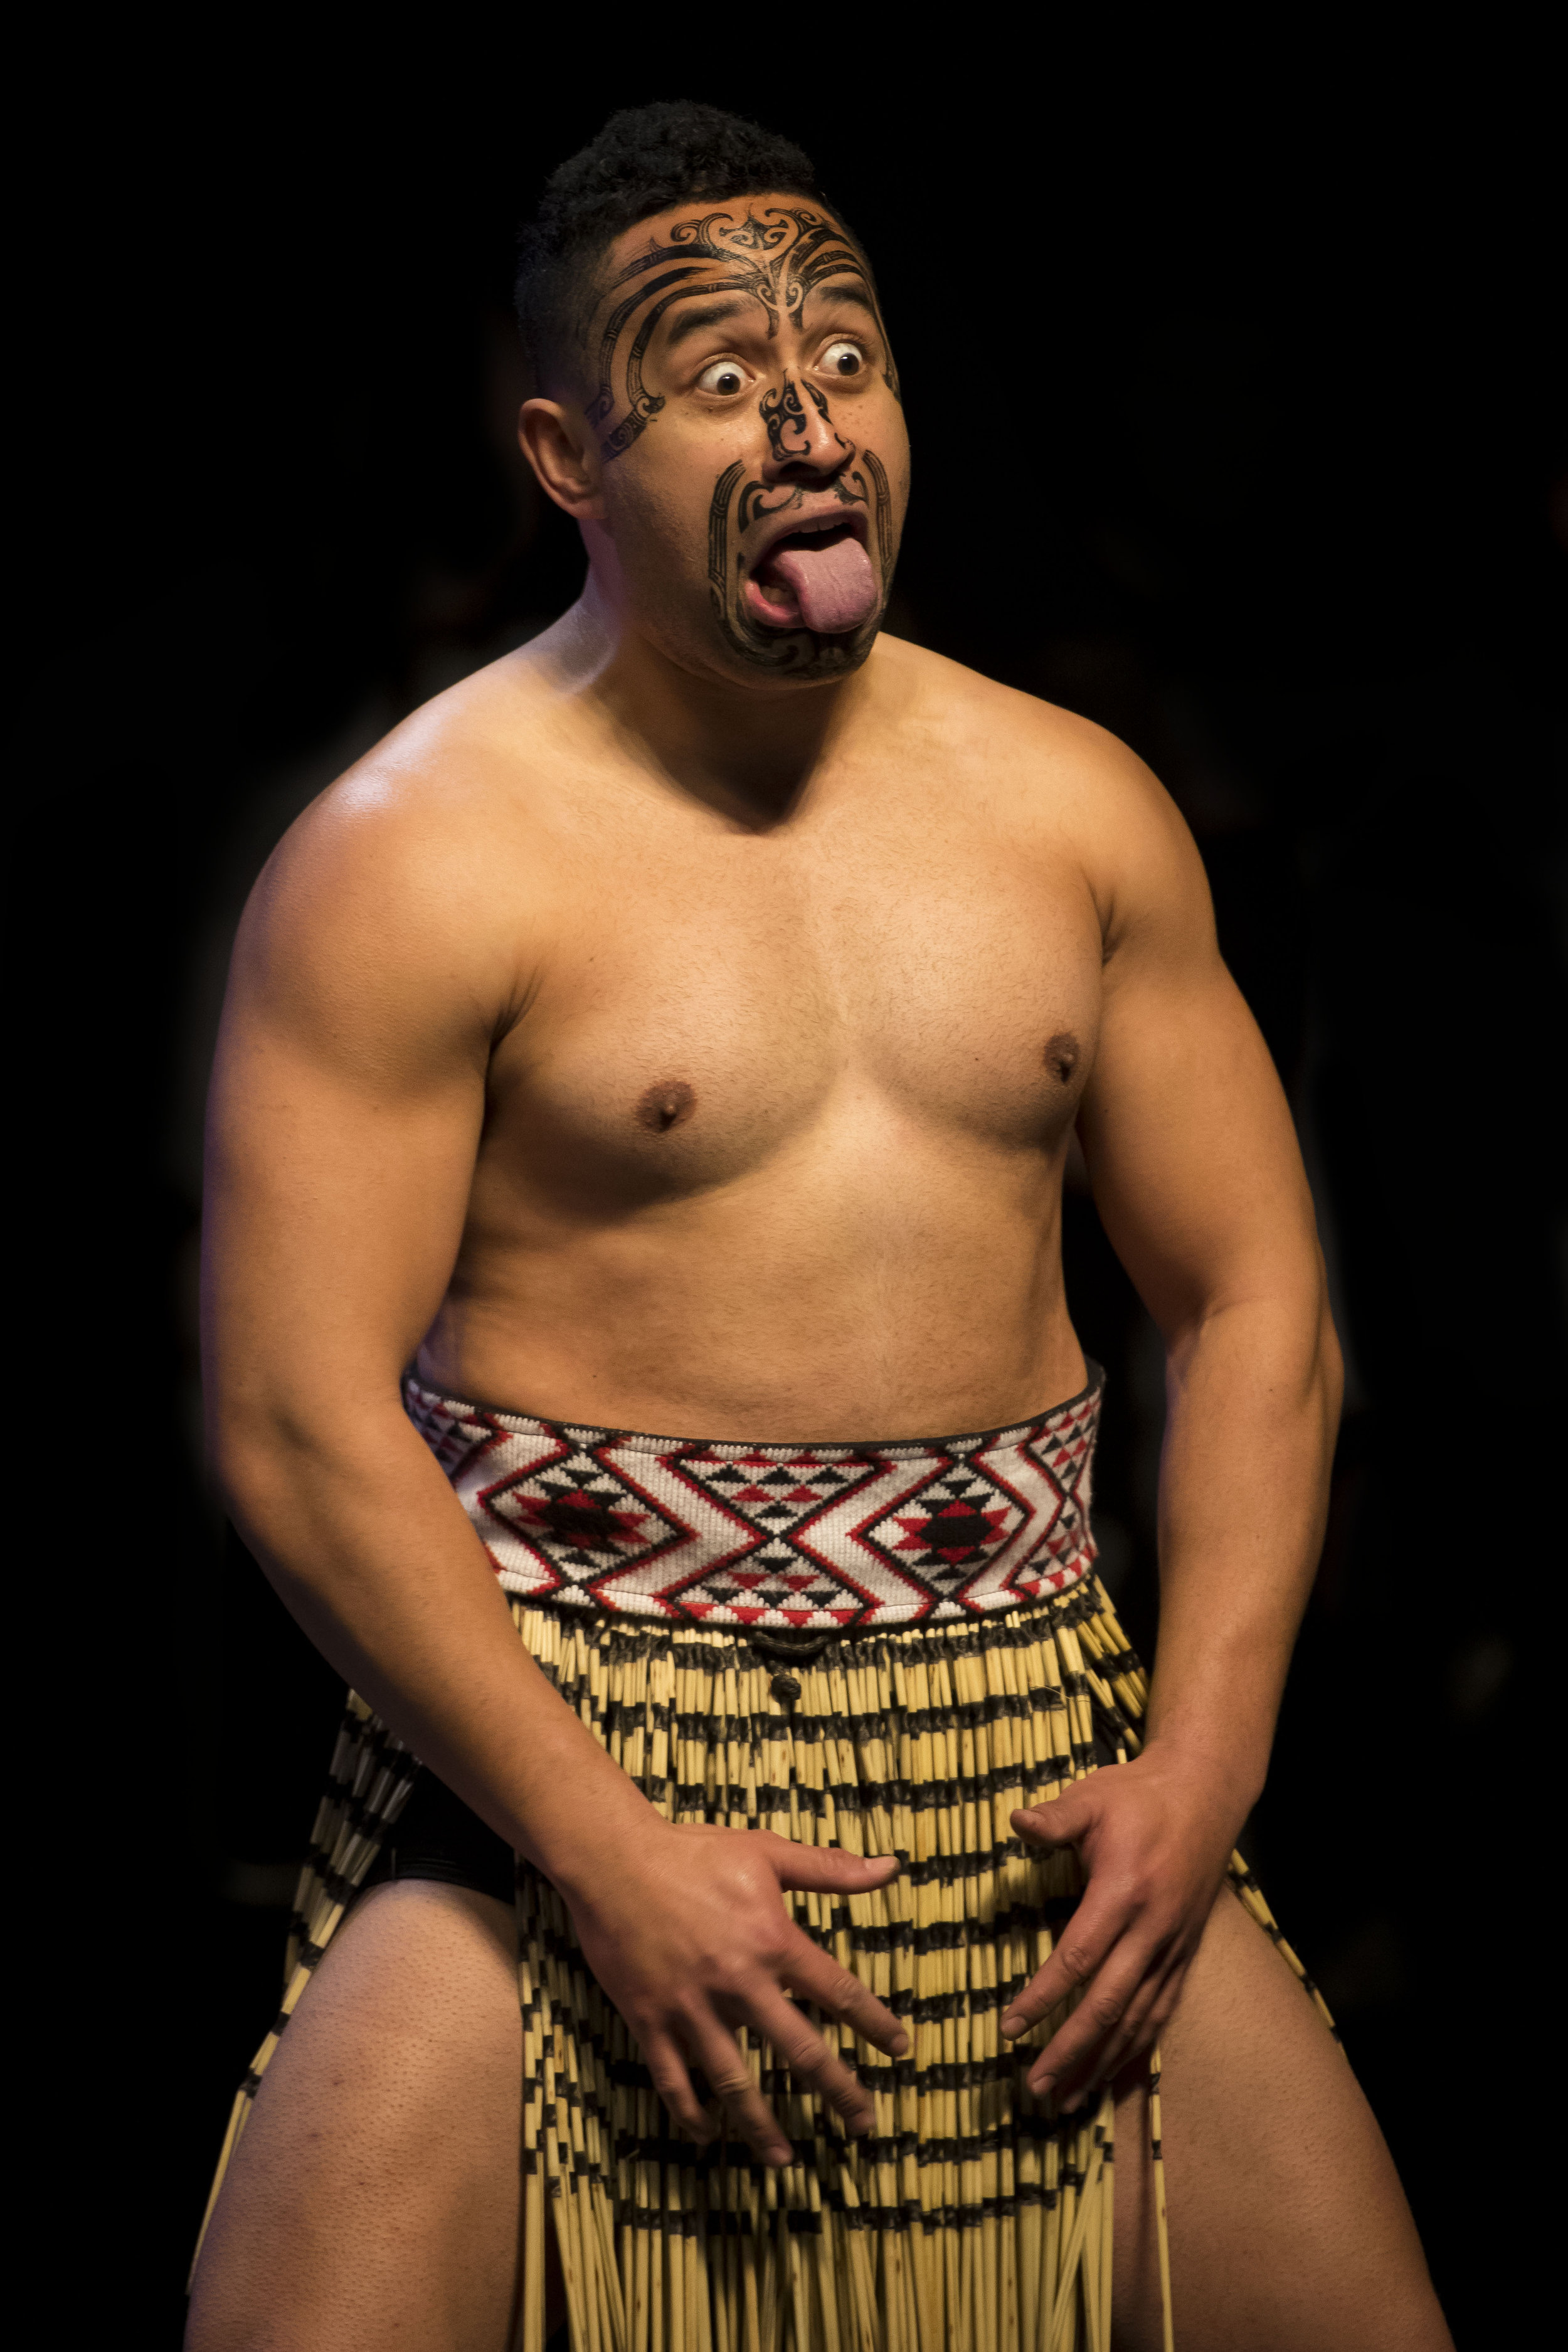  CARDIFF, WALES - MARCH 30: A traditional Haka dance is performed ahead of Joseph Parker's entrance during the weigh-in at the Motorpoint Arena on March 30, 2018 in Cardiff, Wales. Anthony Joshua will fight Joseph Parker in a heavyweight unification 